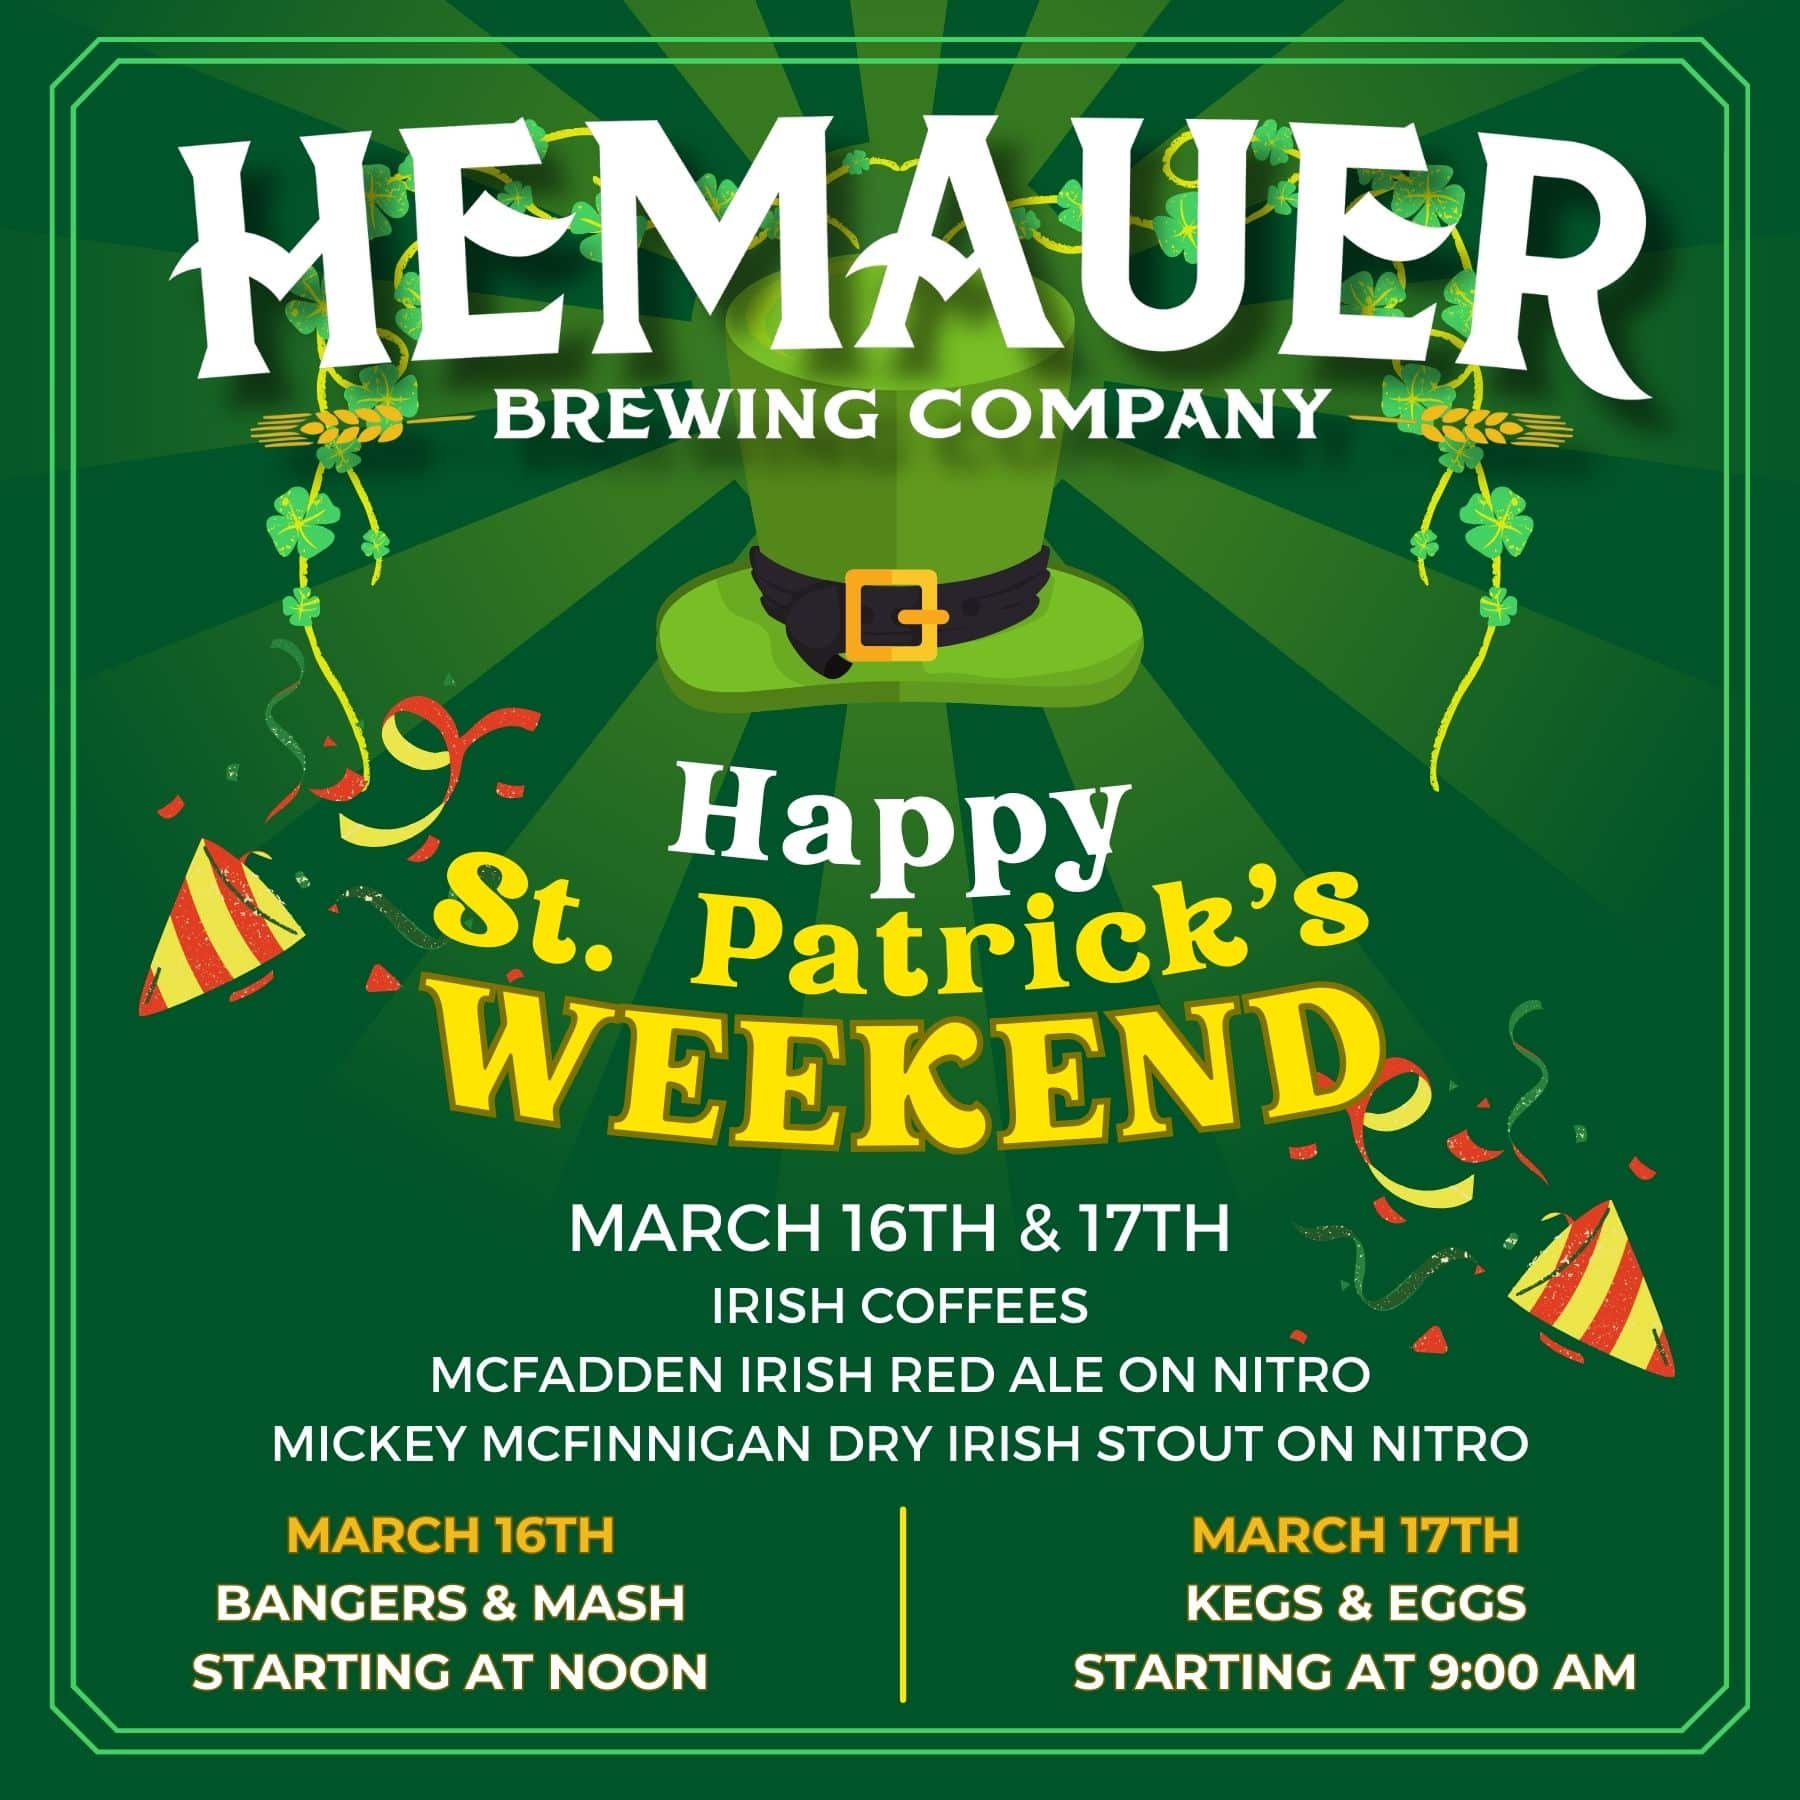 Hemauer Brewing Co. in Mechanicsburg is celebrating St. Patty's Day the weekend of March 16th and 17th.